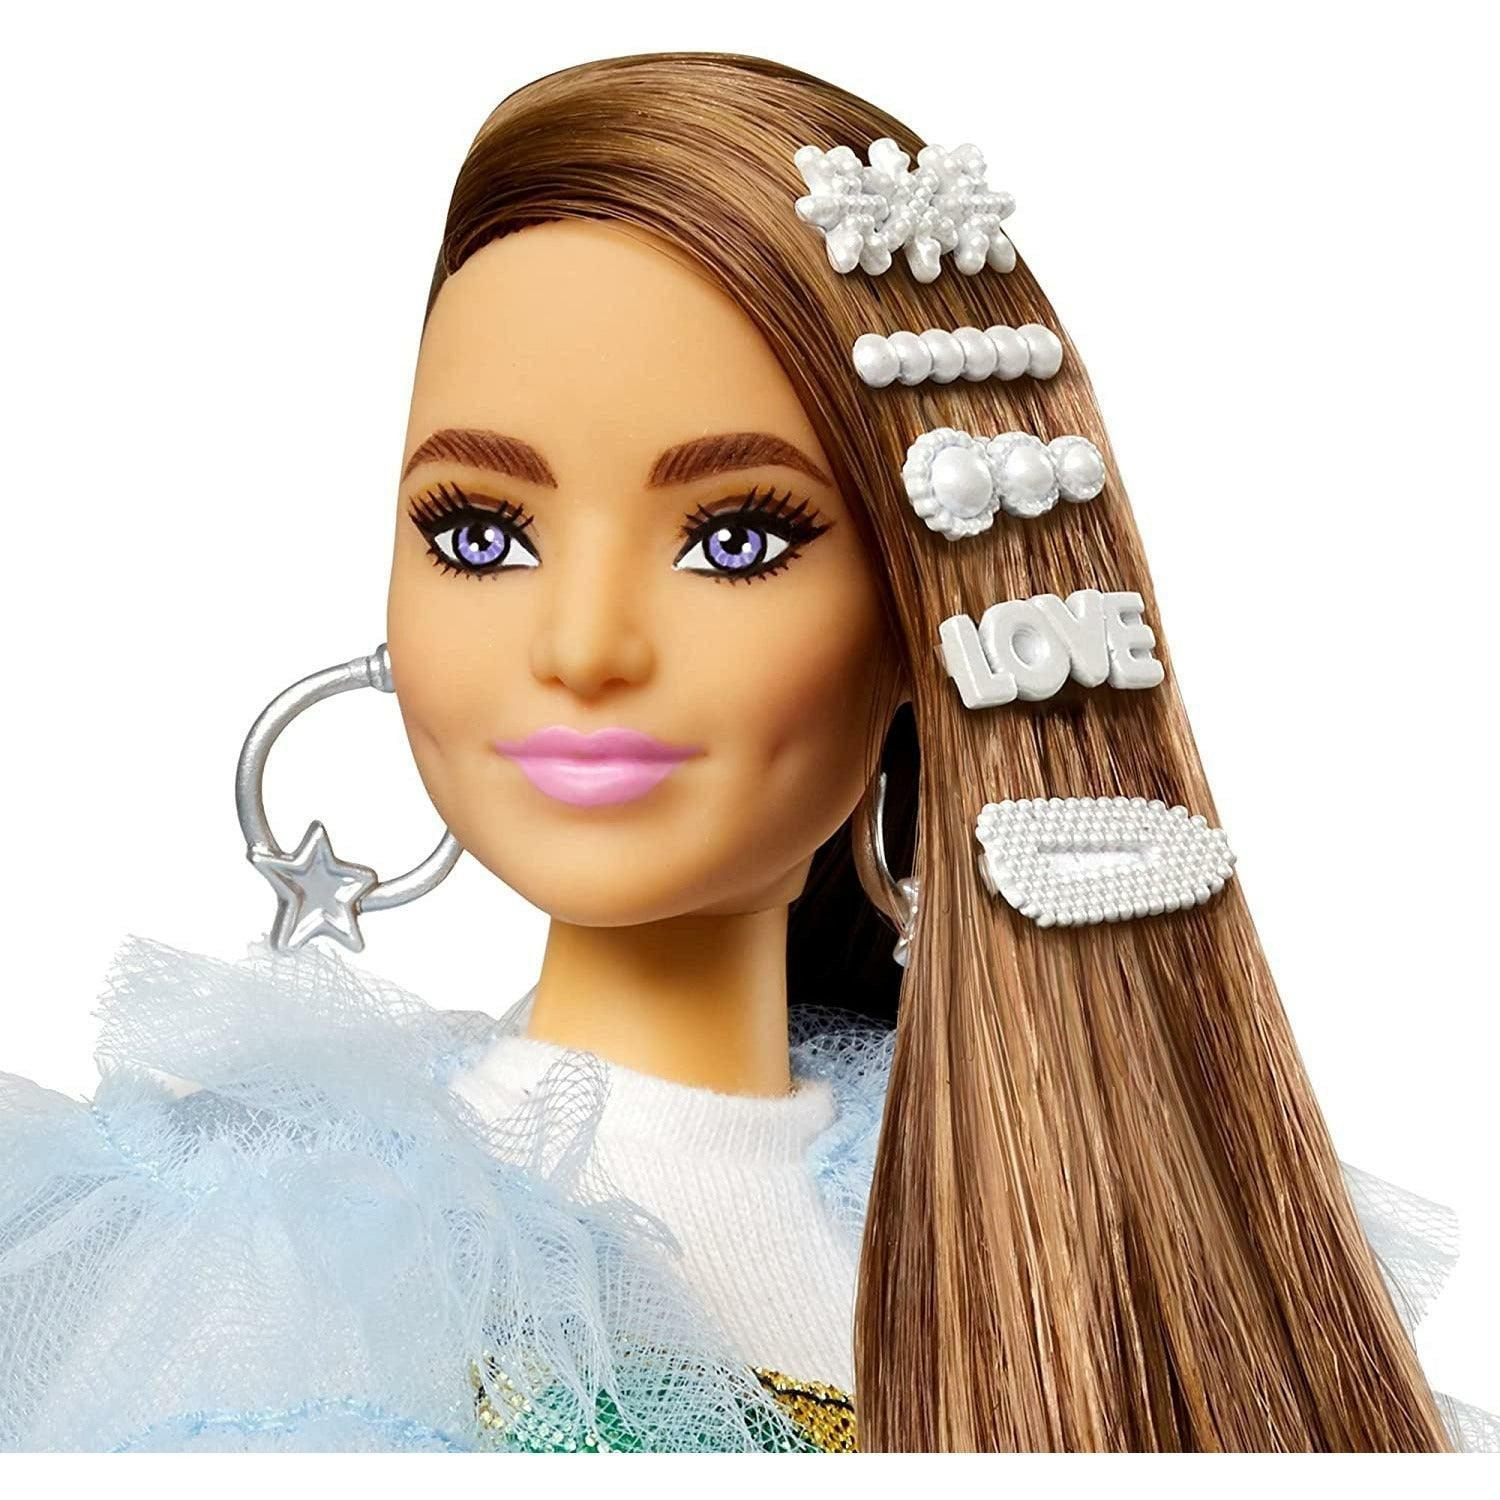 Barbie Extra Doll #9 in Blue Ruffled Jacket with Pet Crocodile, Long Brunette Hair with Bling Hair Clips, Layered Outfit & Accessories - BumbleToys - 5-7 Years, Barbie, Dolls, Fashion Dolls & Accessories, Girls, OXE, Pre-Order